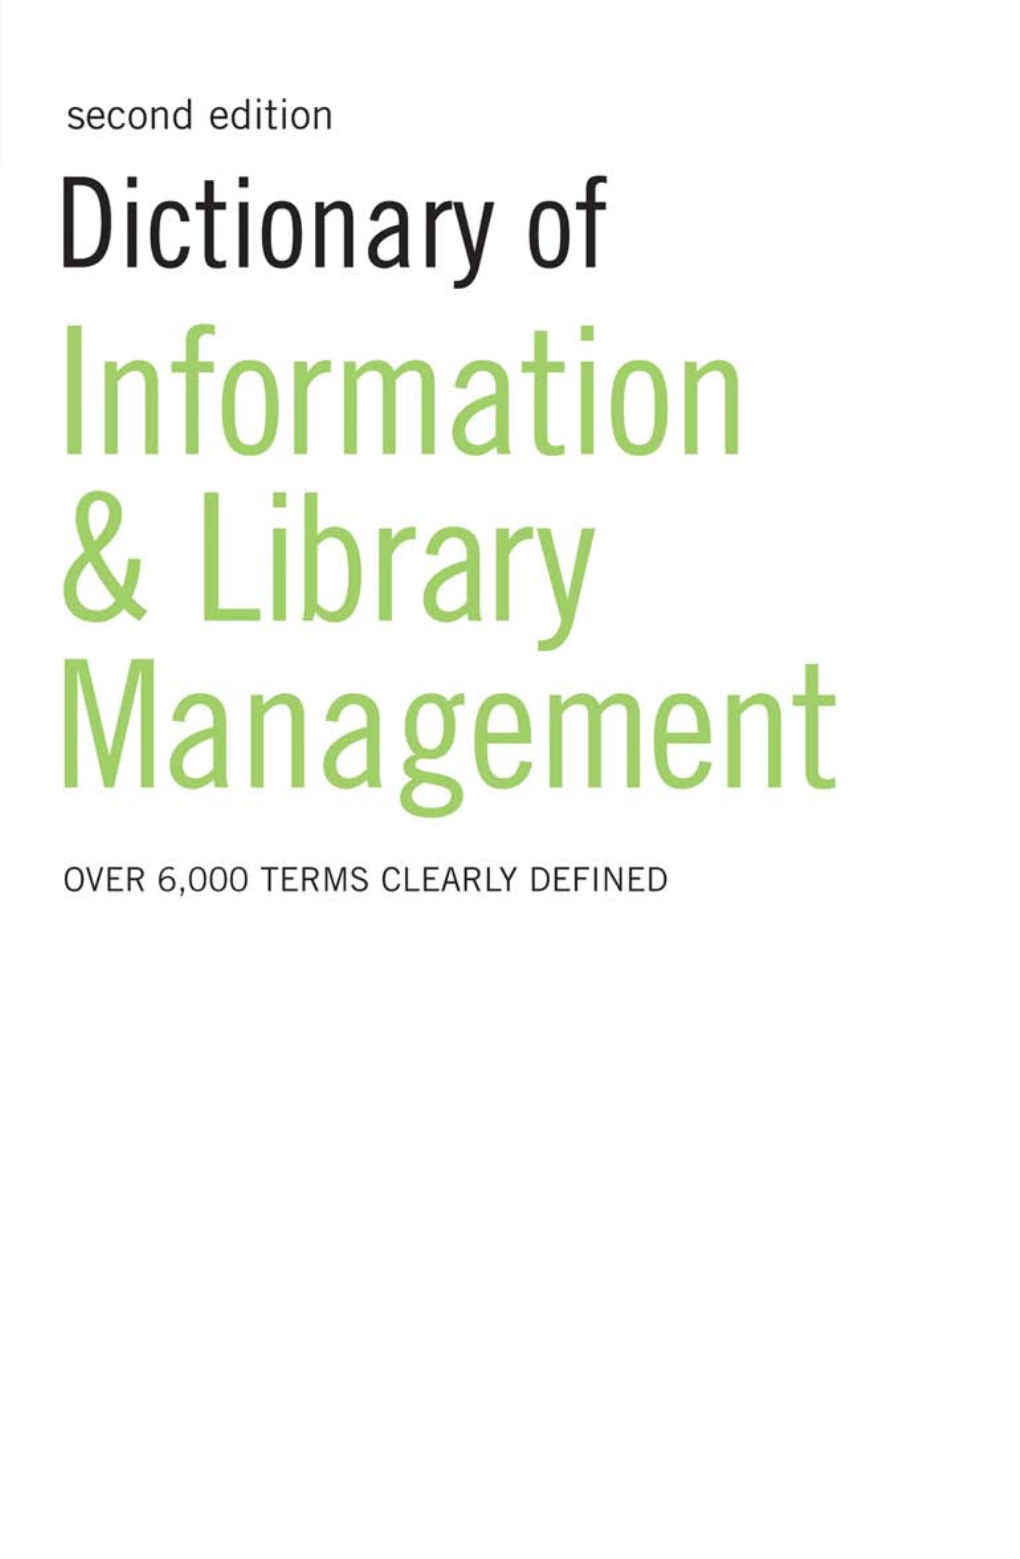 Dictionary of Information and Library Management.Pdf